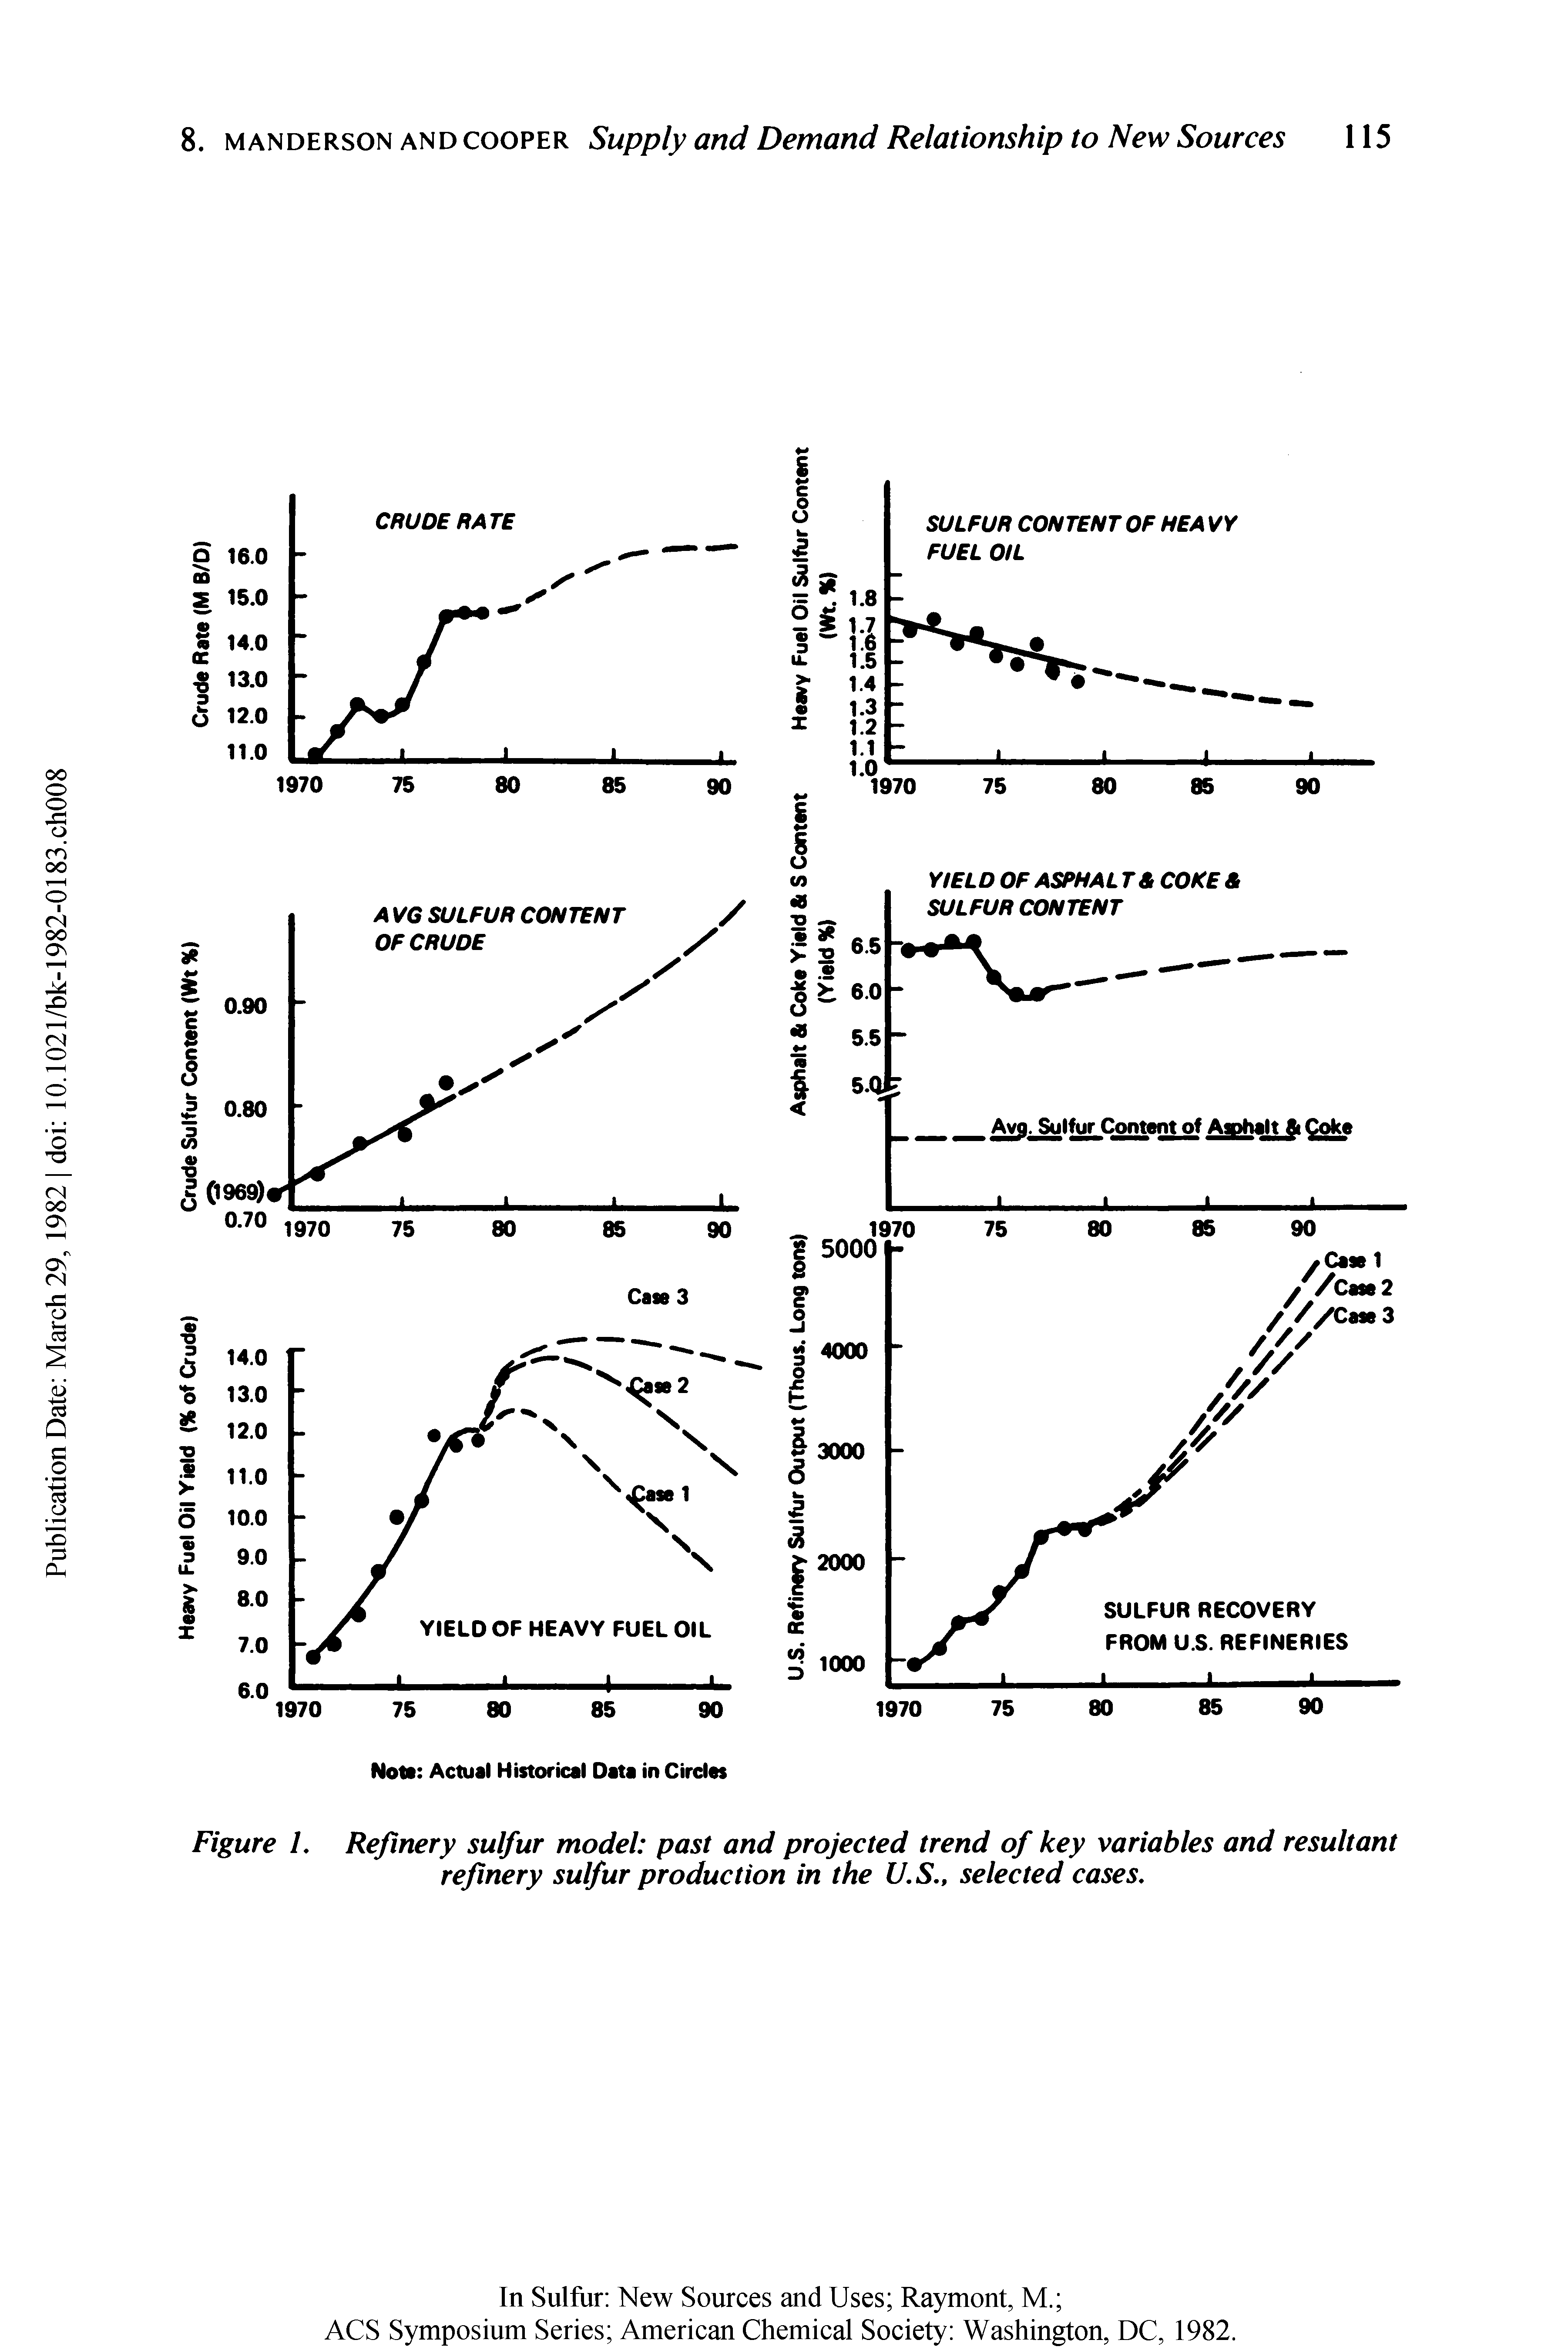 Figure 1. Refinery sulfur model past and projected trend of key variables and resultant refinery sulfur production in the U.S., selected cases.